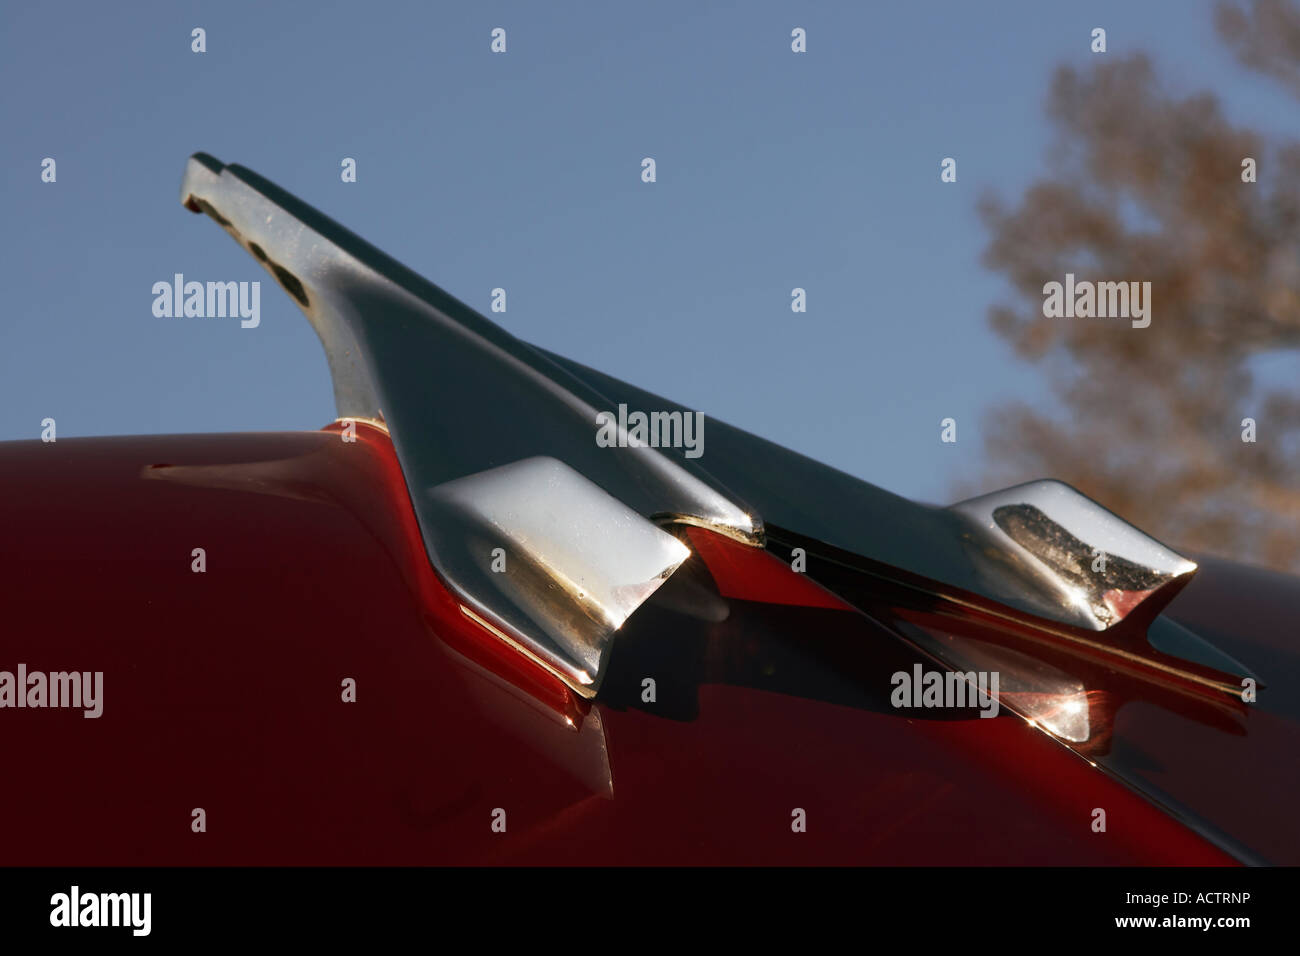 The hood ornament of a red 1956 Chevrolet Stock Photo